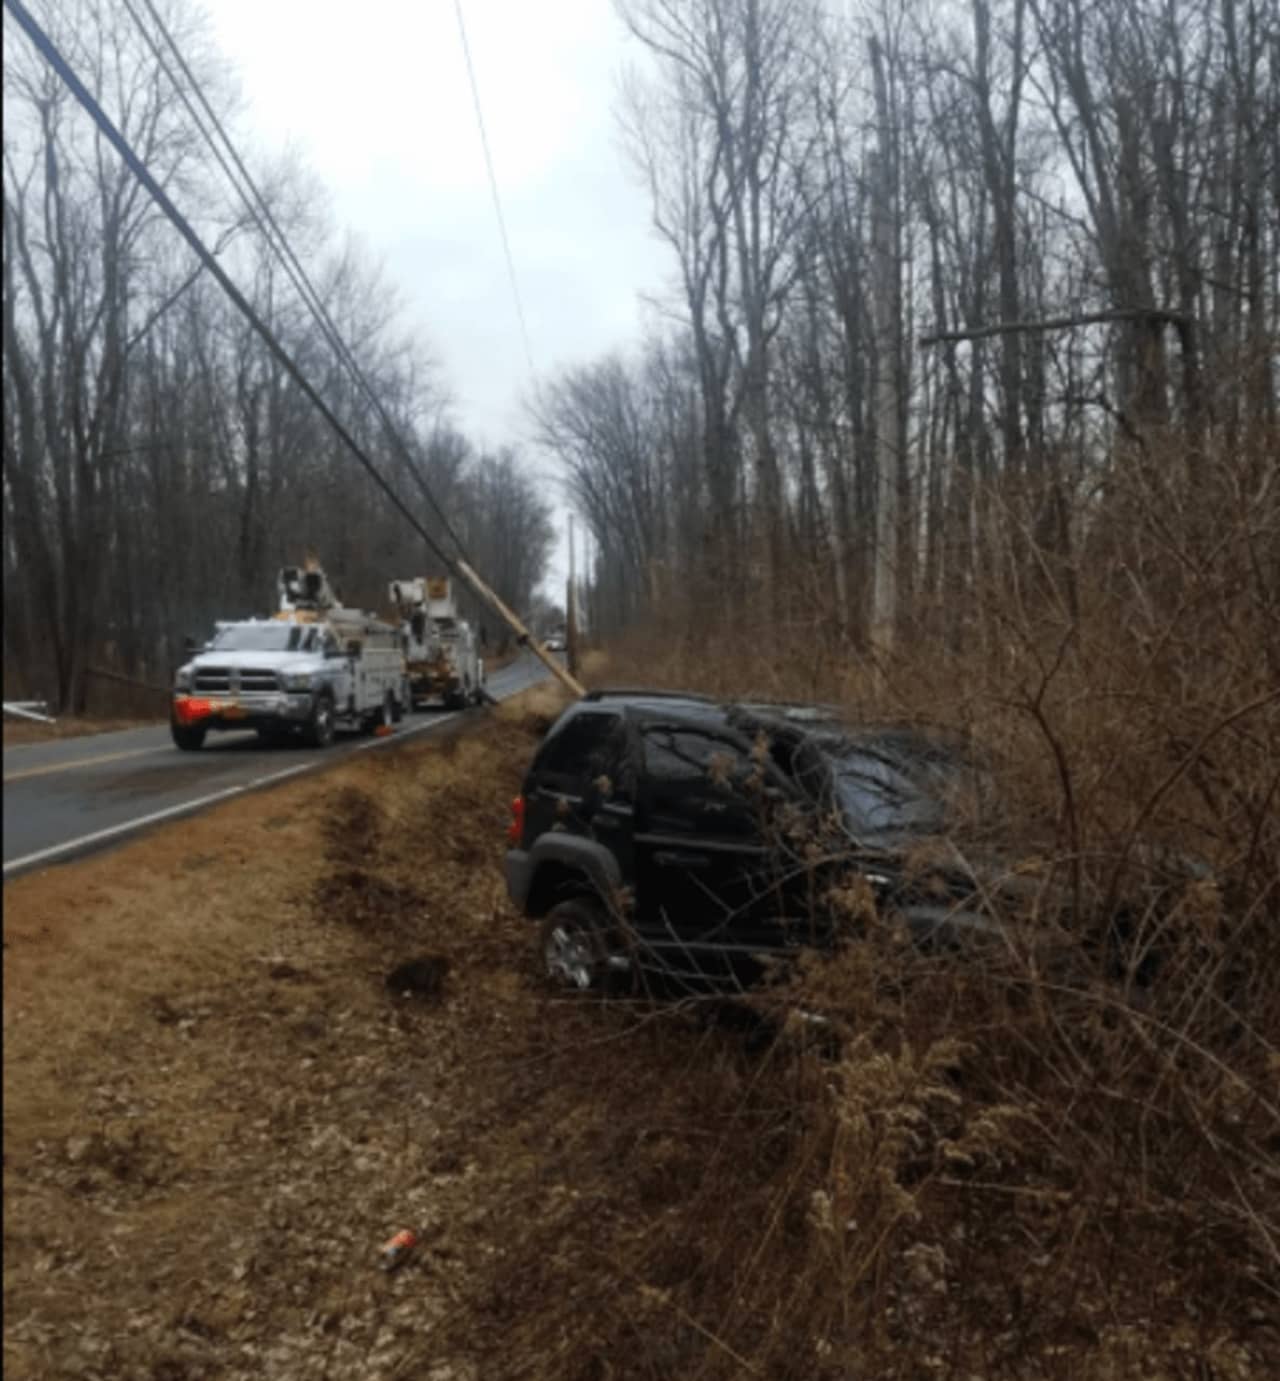 At about 12:50 p.m. Friday, Red Hook Police responded to a 911 call reporting a single-vehicle auto accident on East Kerley Corners Road in the Town of Red Hook.